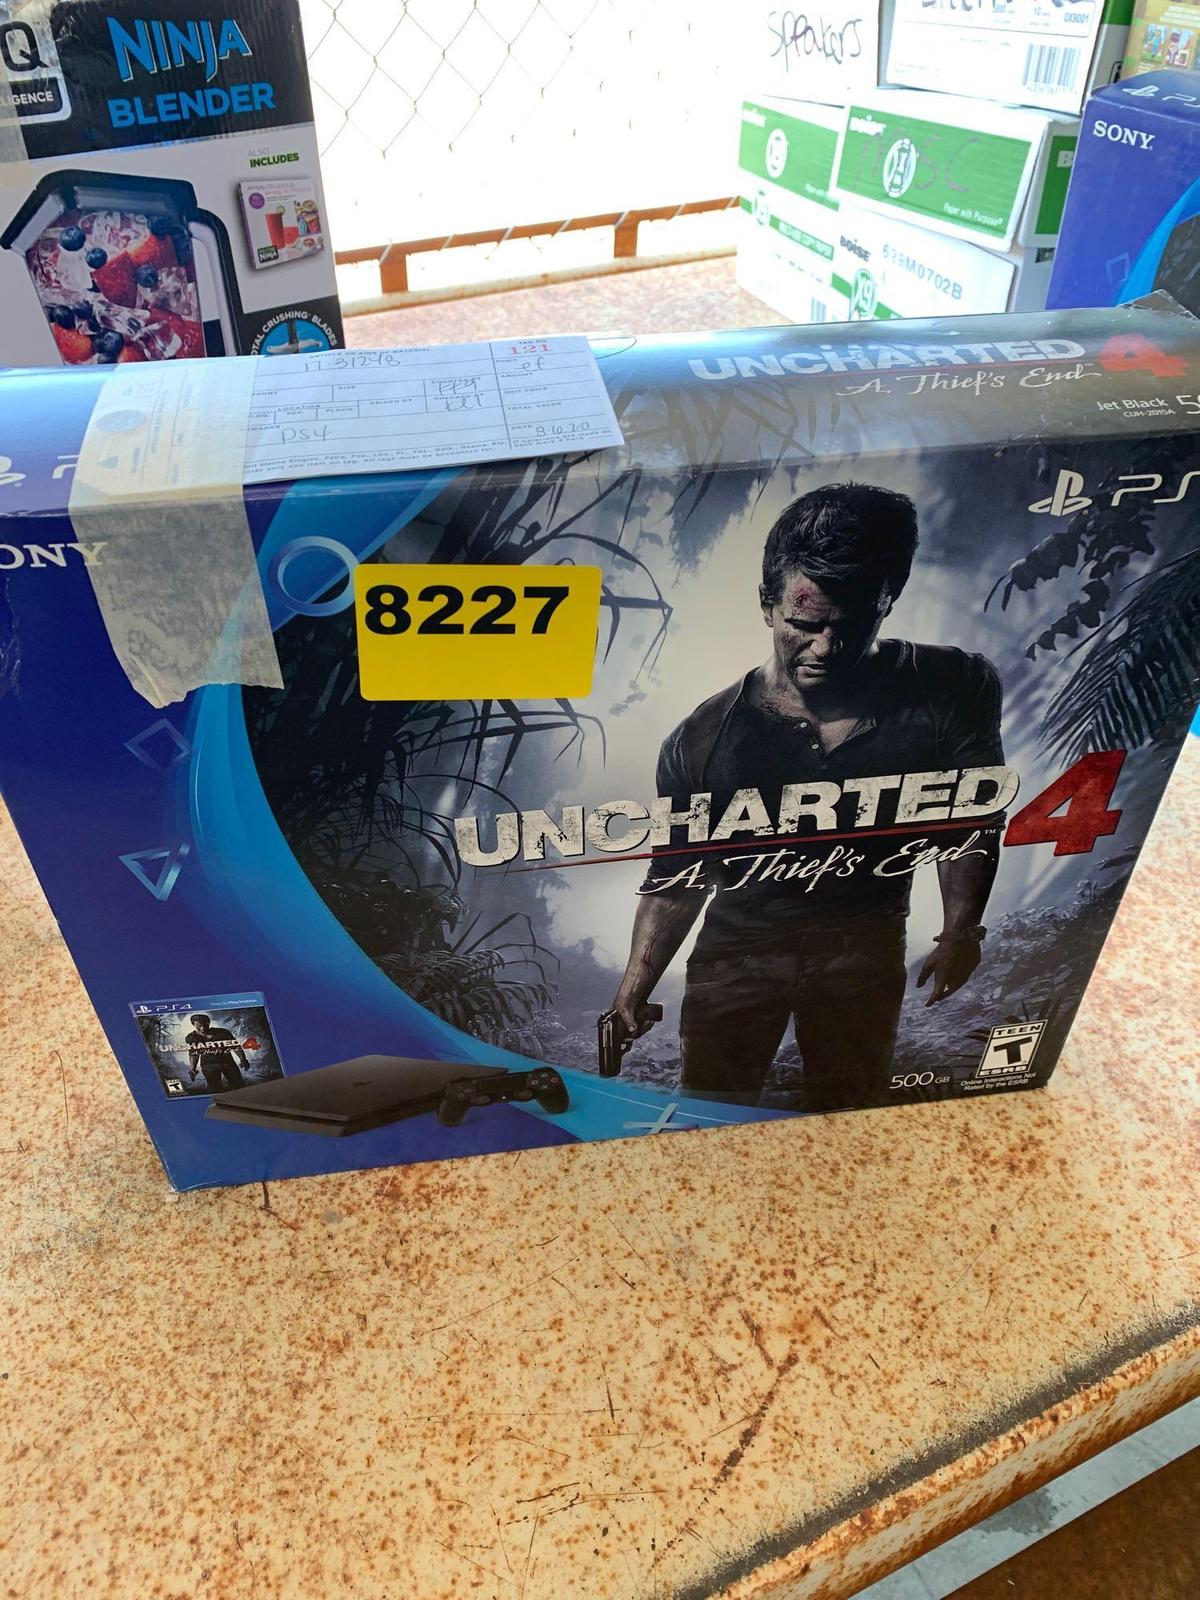 PS4 UNCHARTED 4 EDITION